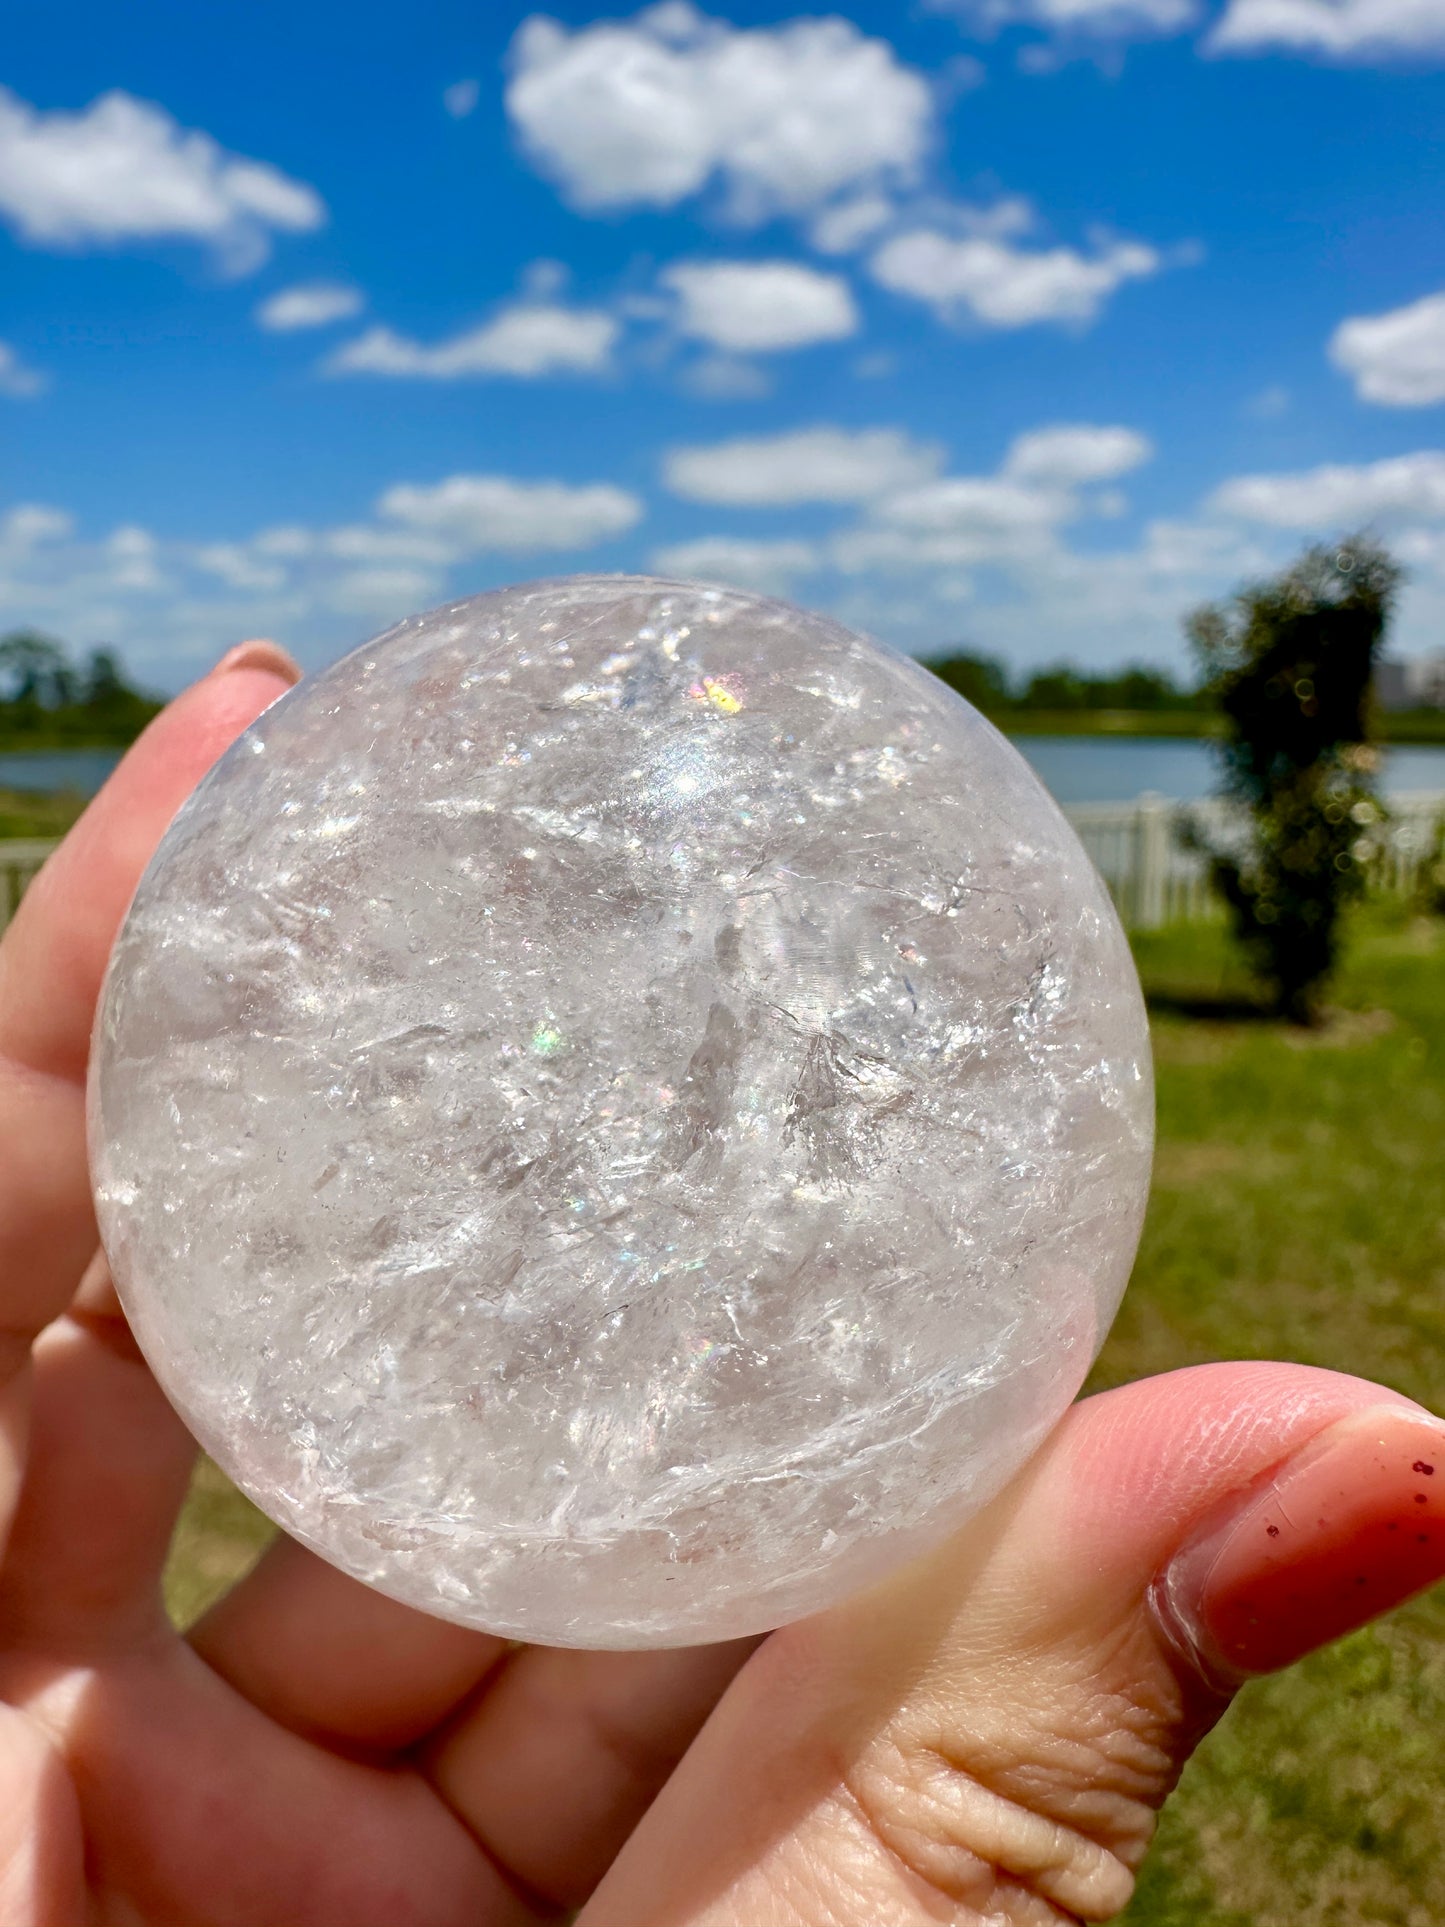 Clear Quartz Sphere - Perfectly Polished Crystal Ball for Healing, Clarity, and Enhancing Spiritual Practices